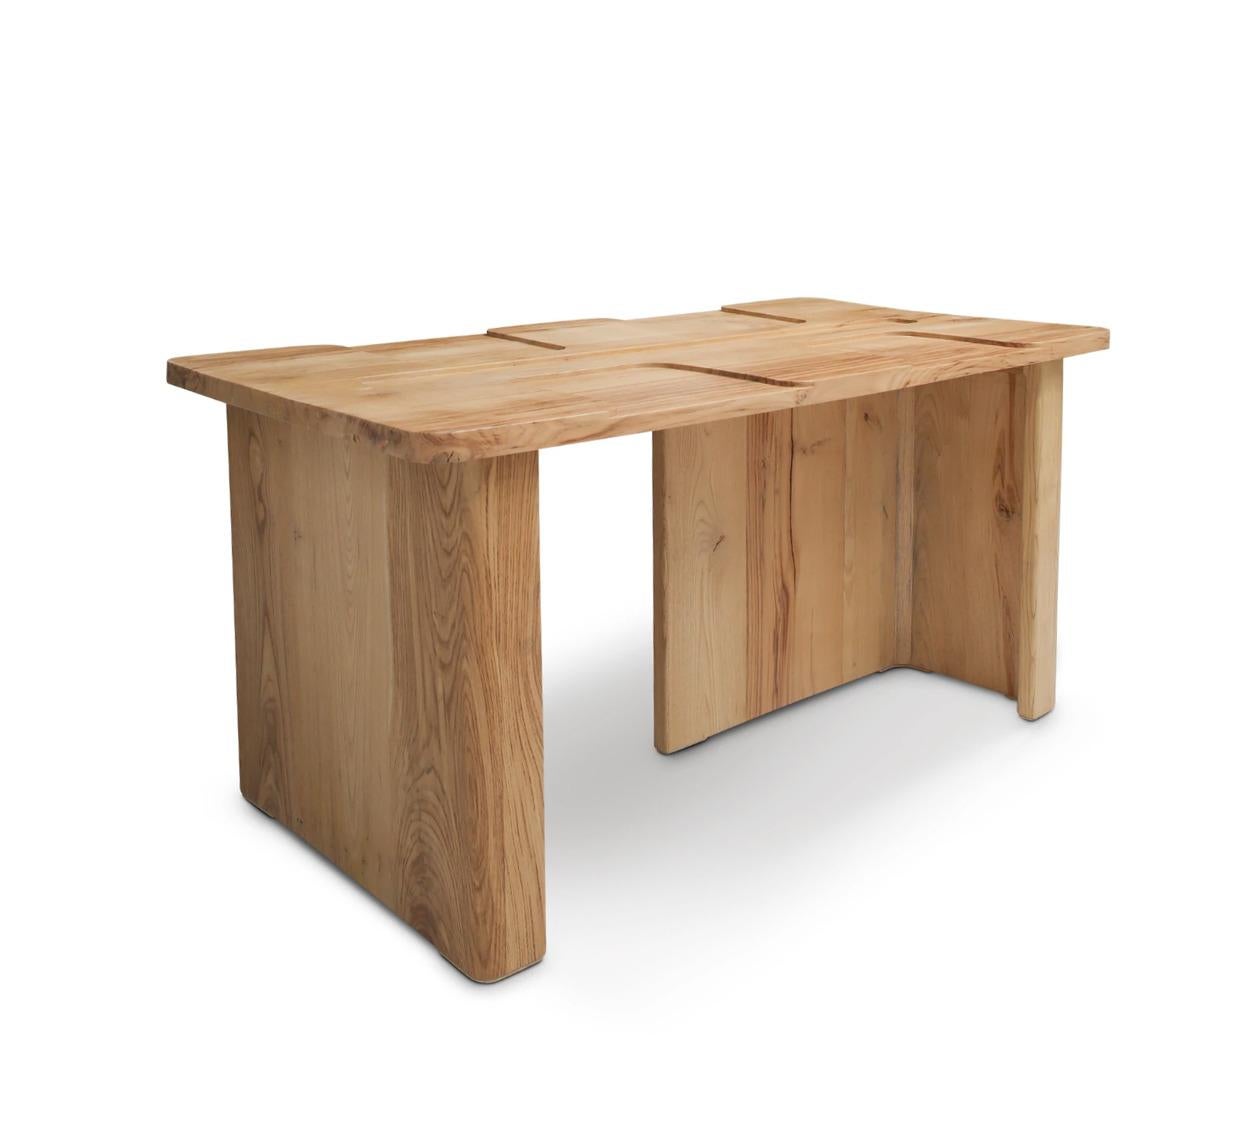 Henry Table by ZAROLAT 
Dimensions: D 85 x W 150 x H 70 cm. 
Materials: Chestnut wood.

The Henry Table is a manifestation to go beyond a traditional dining table. It proposes a deep sensitivity to give direction to dish placement and seating for